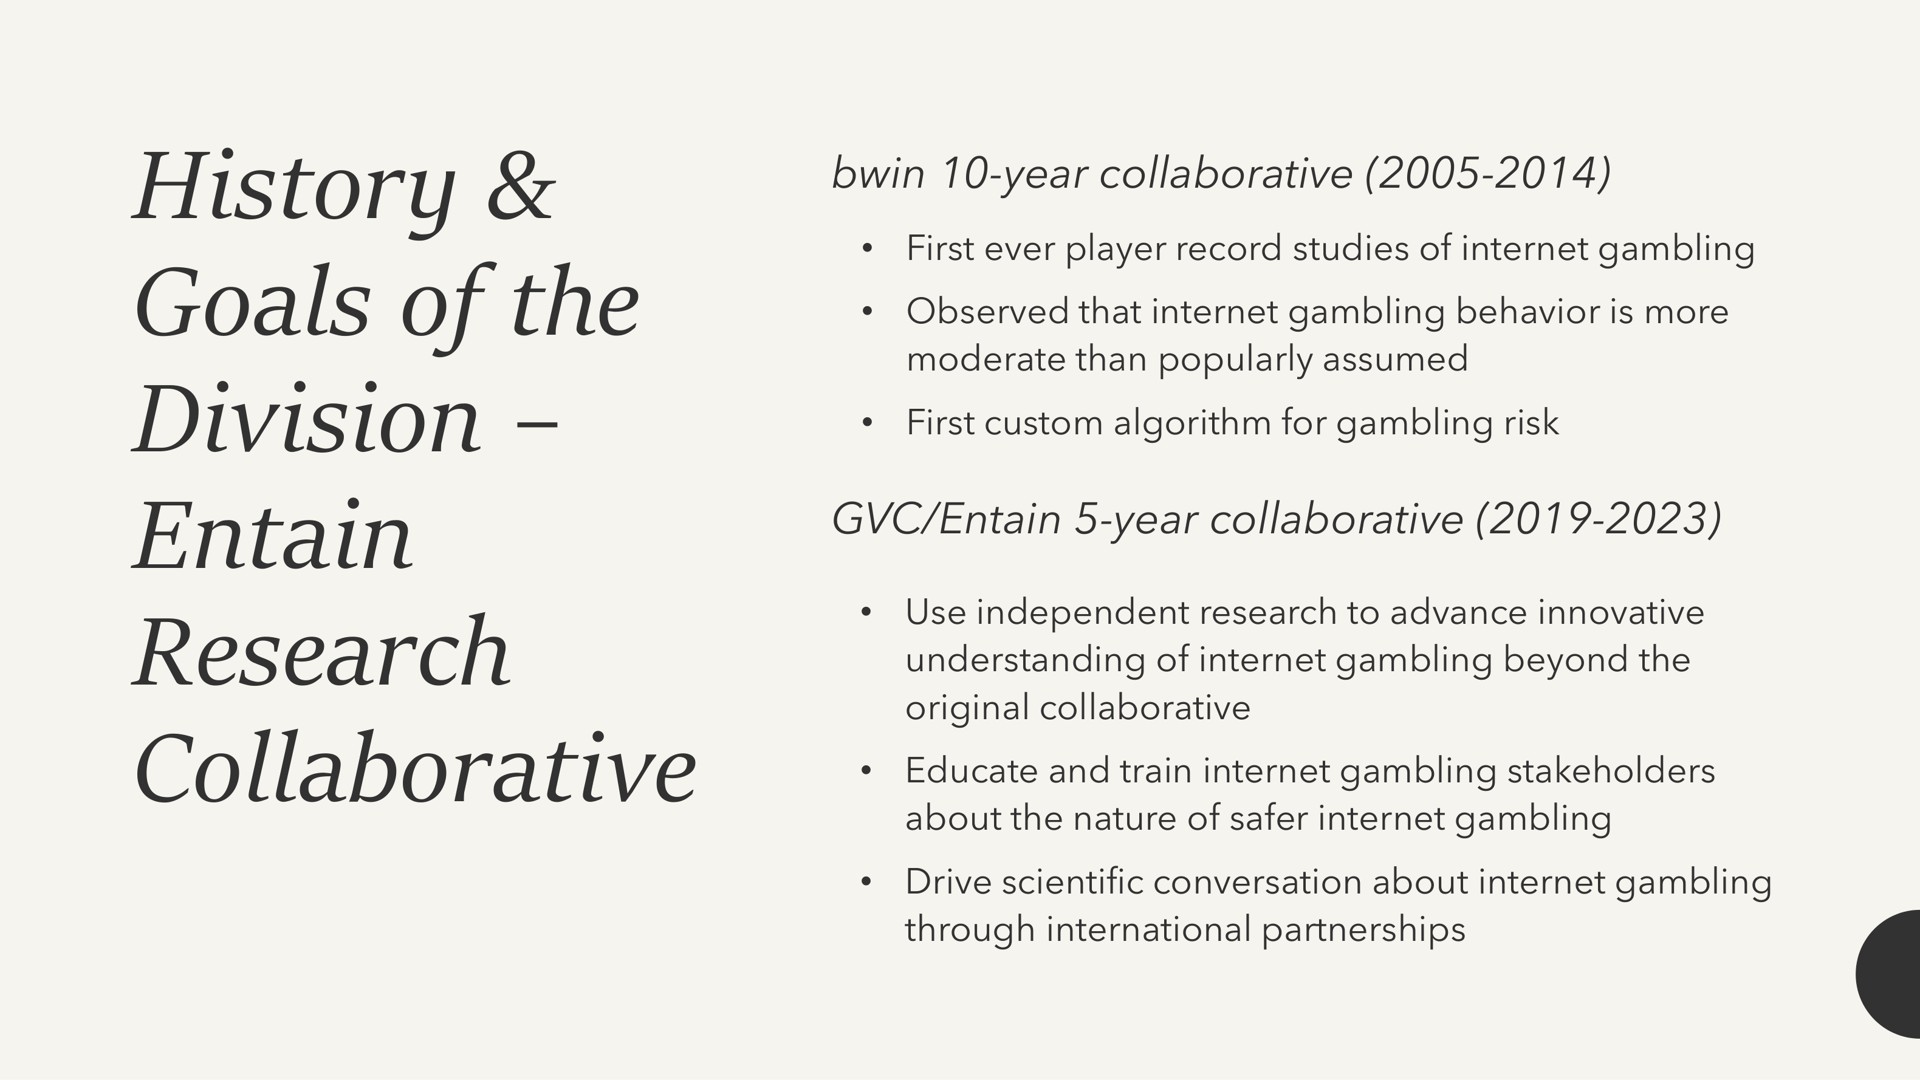 history goals of the division research collaborative | Entain Group